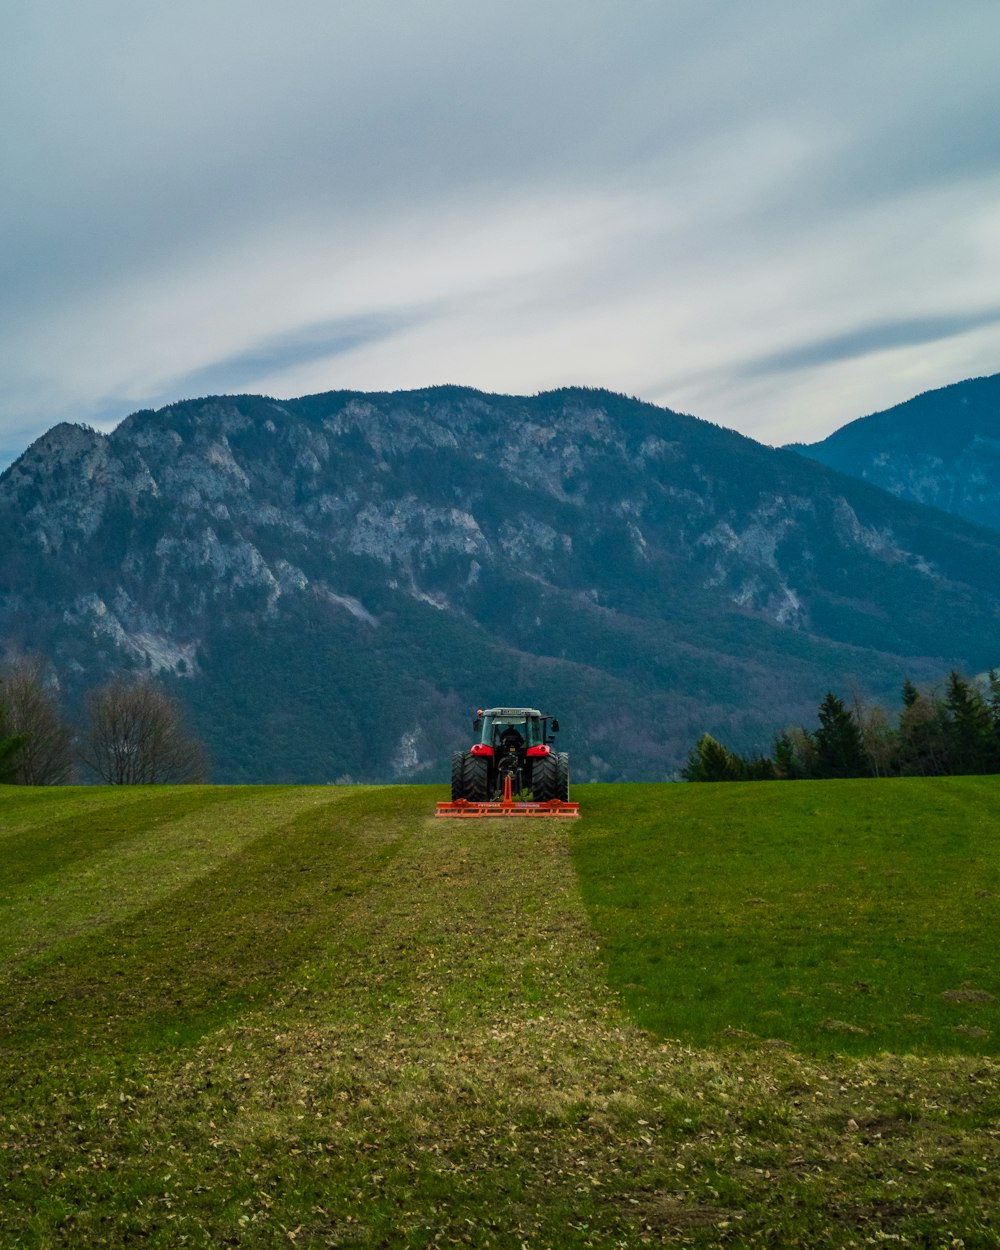 red and black tractor on green grass field near mountain during daytime